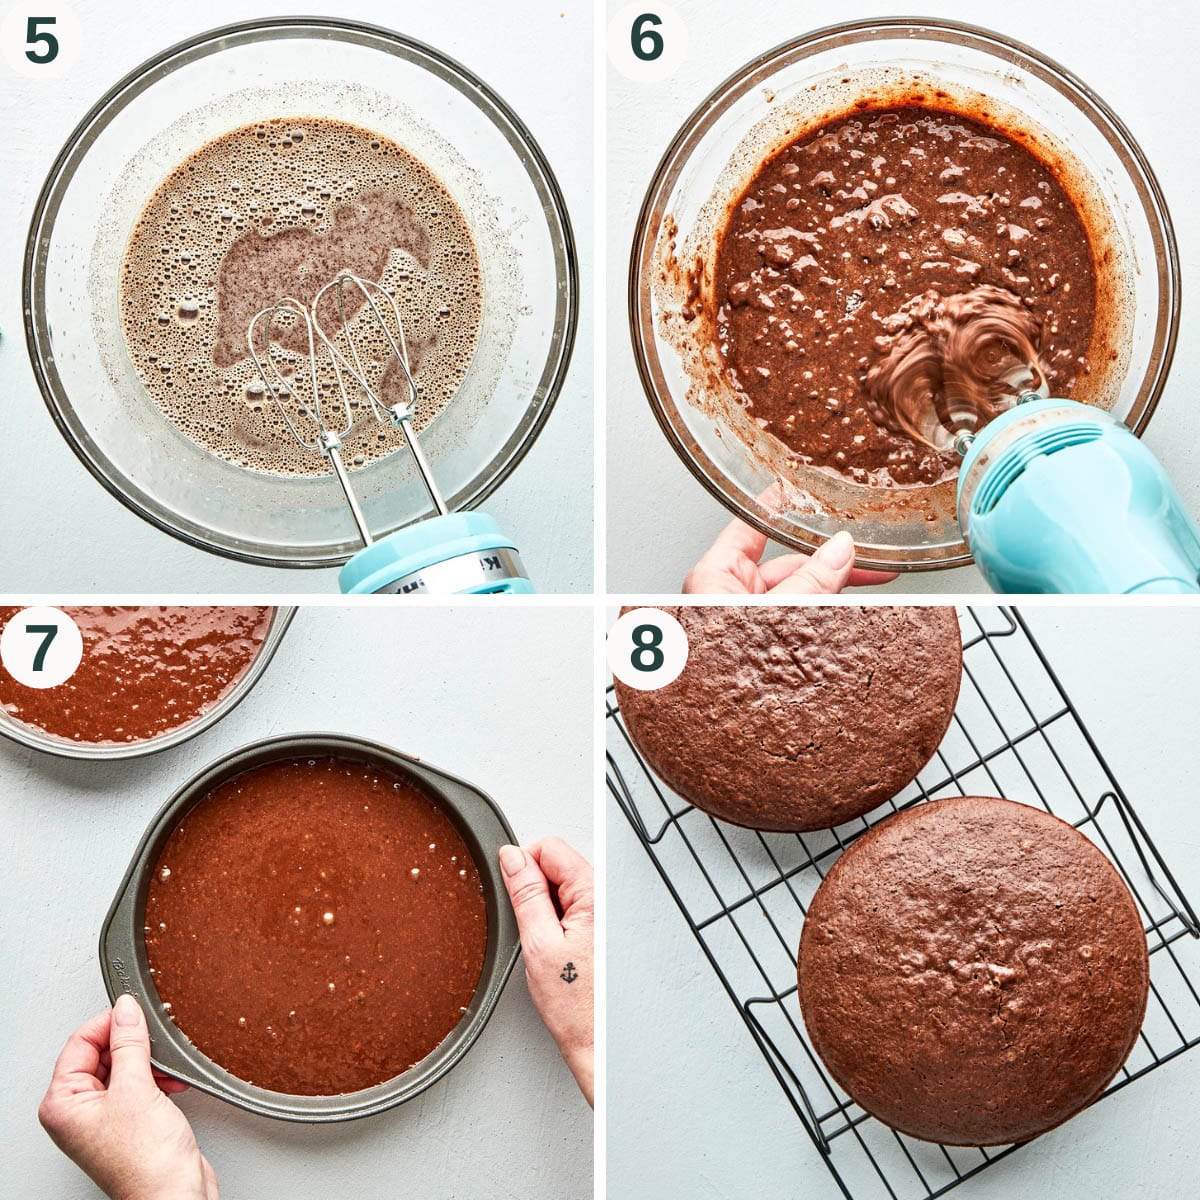 Chocolate cake steps 5 to 8, mixing batter and before and after baking.